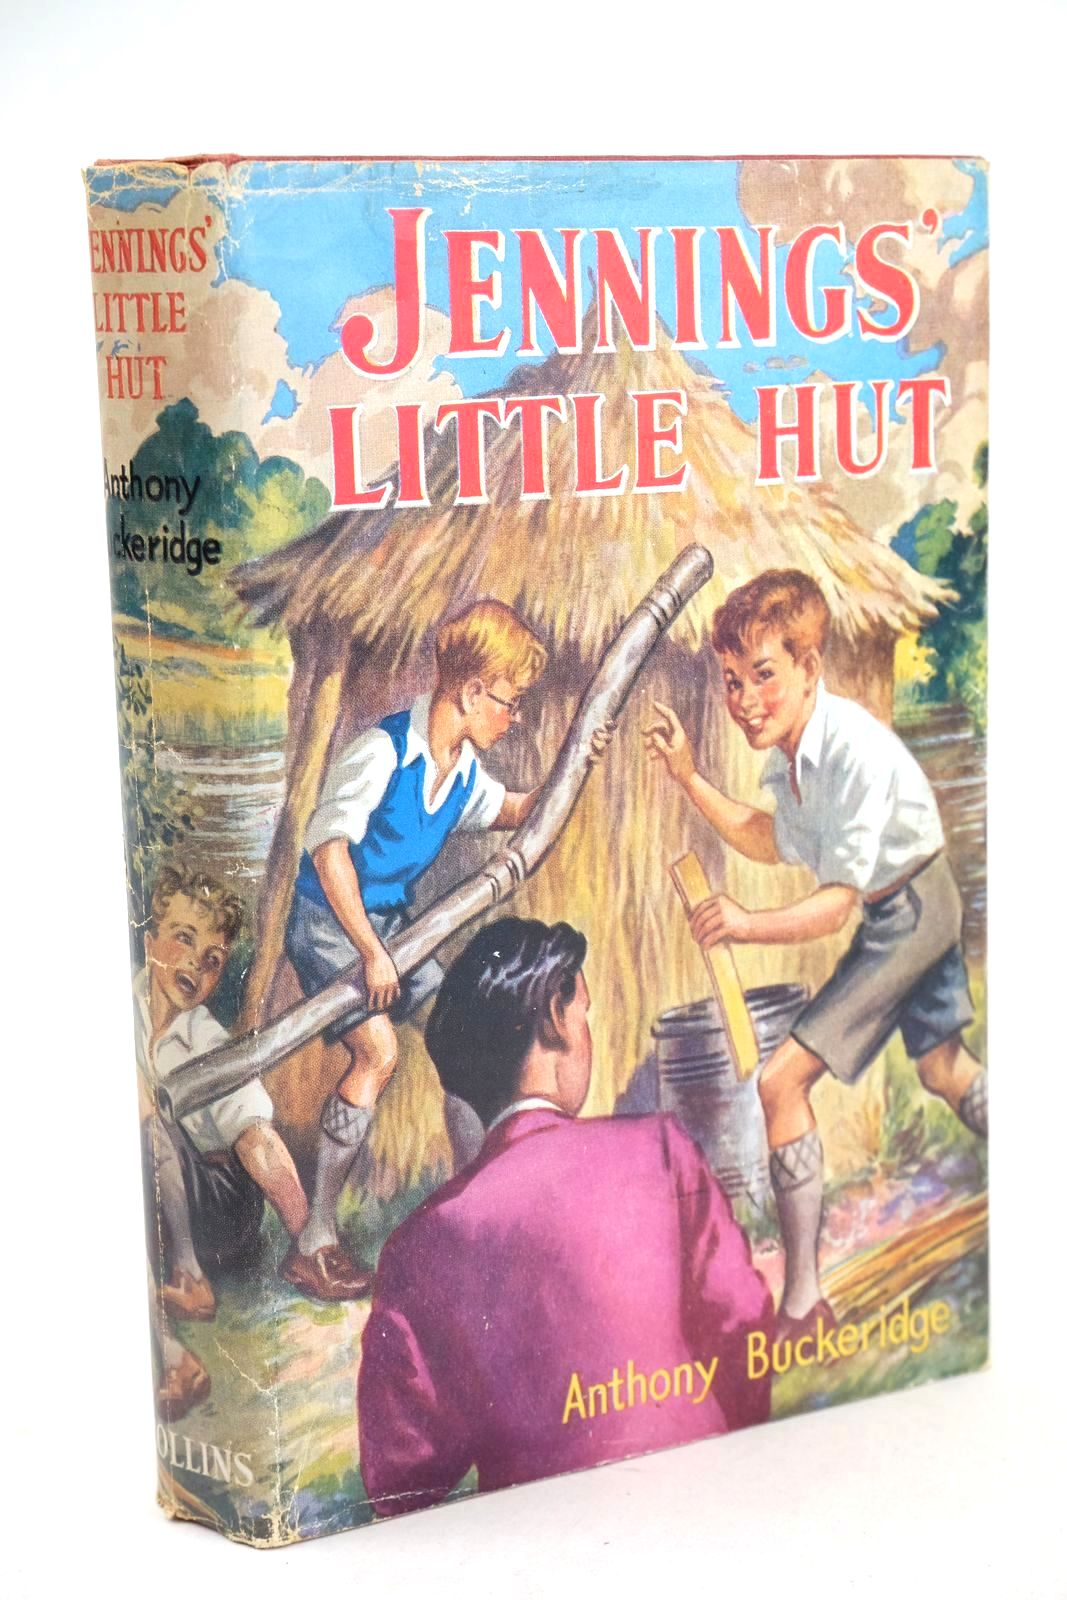 Photo of JENNINGS' LITTLE HUT written by Buckeridge, Anthony published by Collins (STOCK CODE: 1326048)  for sale by Stella & Rose's Books